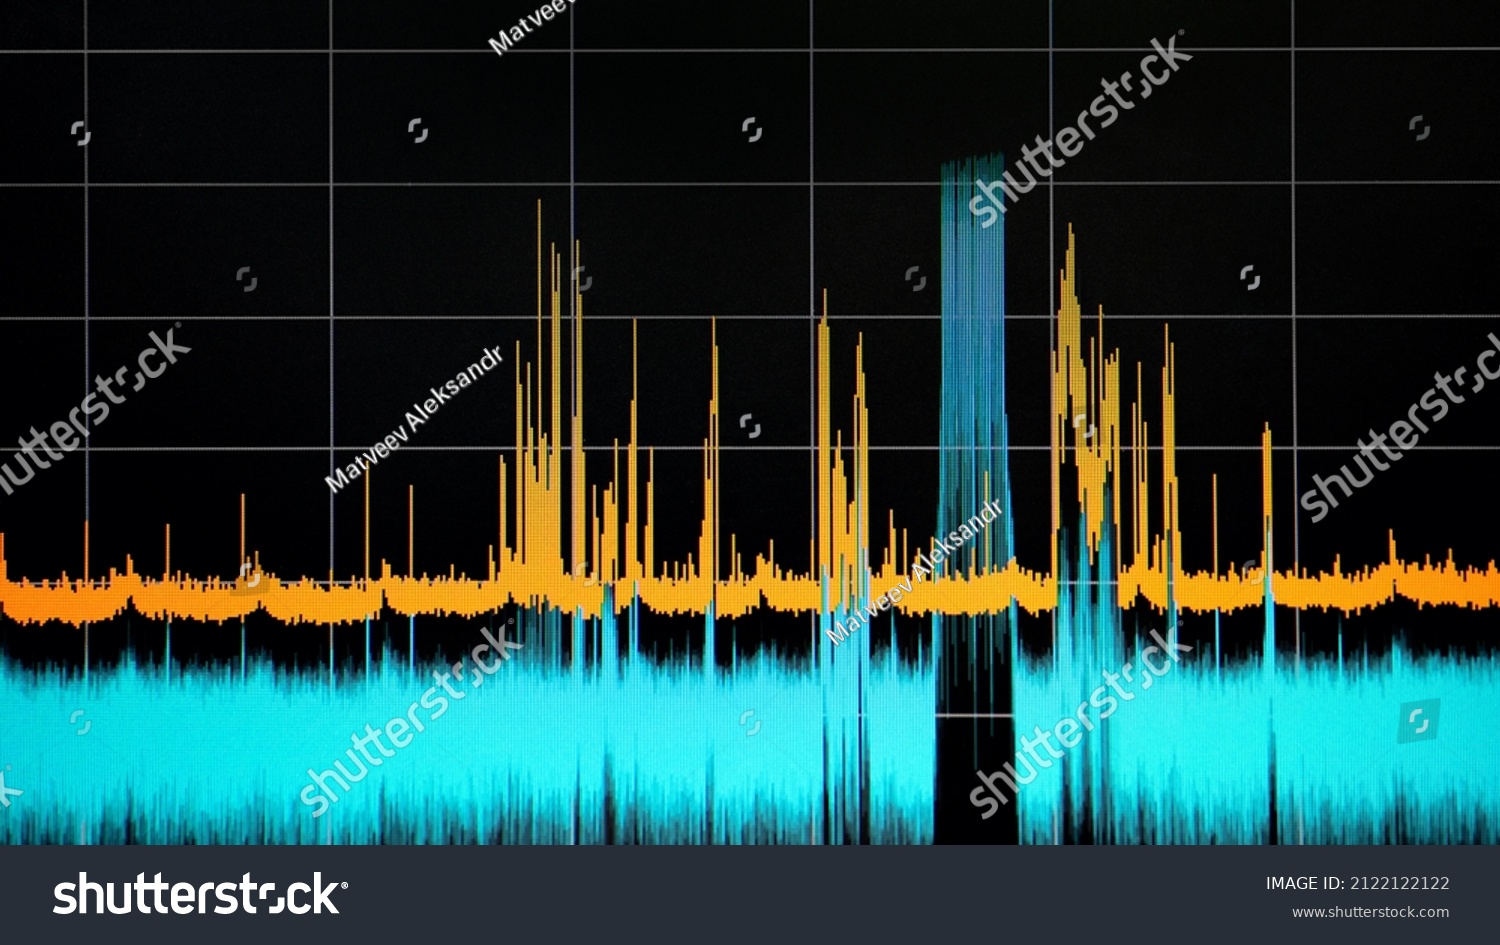 Electrical waveforms of the measured digital signal. Oscillogram of the output signal. Radio measurements of high frequency currents. #2122122122